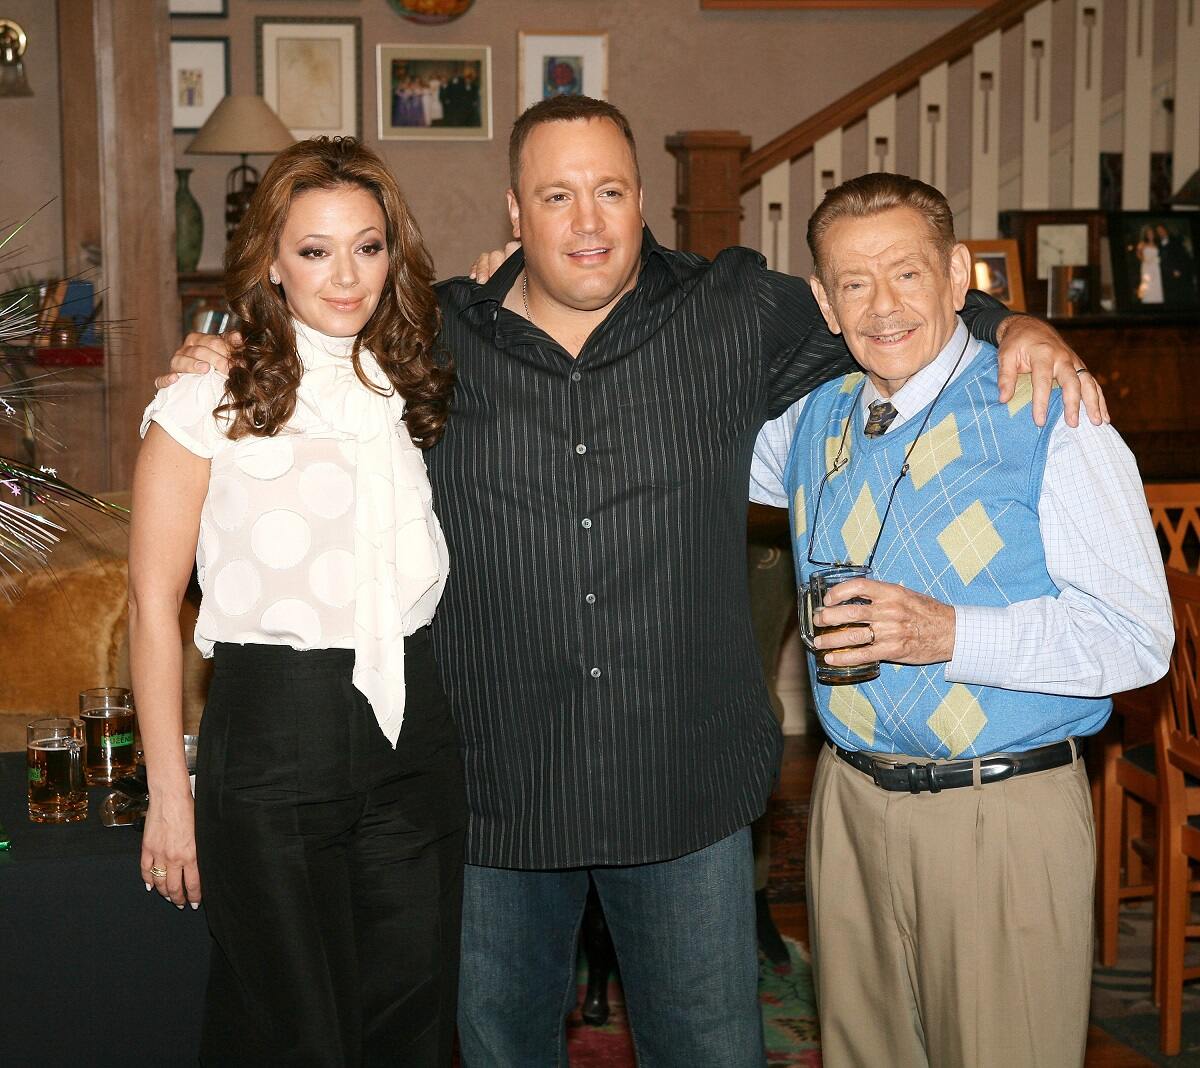 Leah Remini, Kevin James and Jerry Stiller pose together in the Heffernens' living room for 